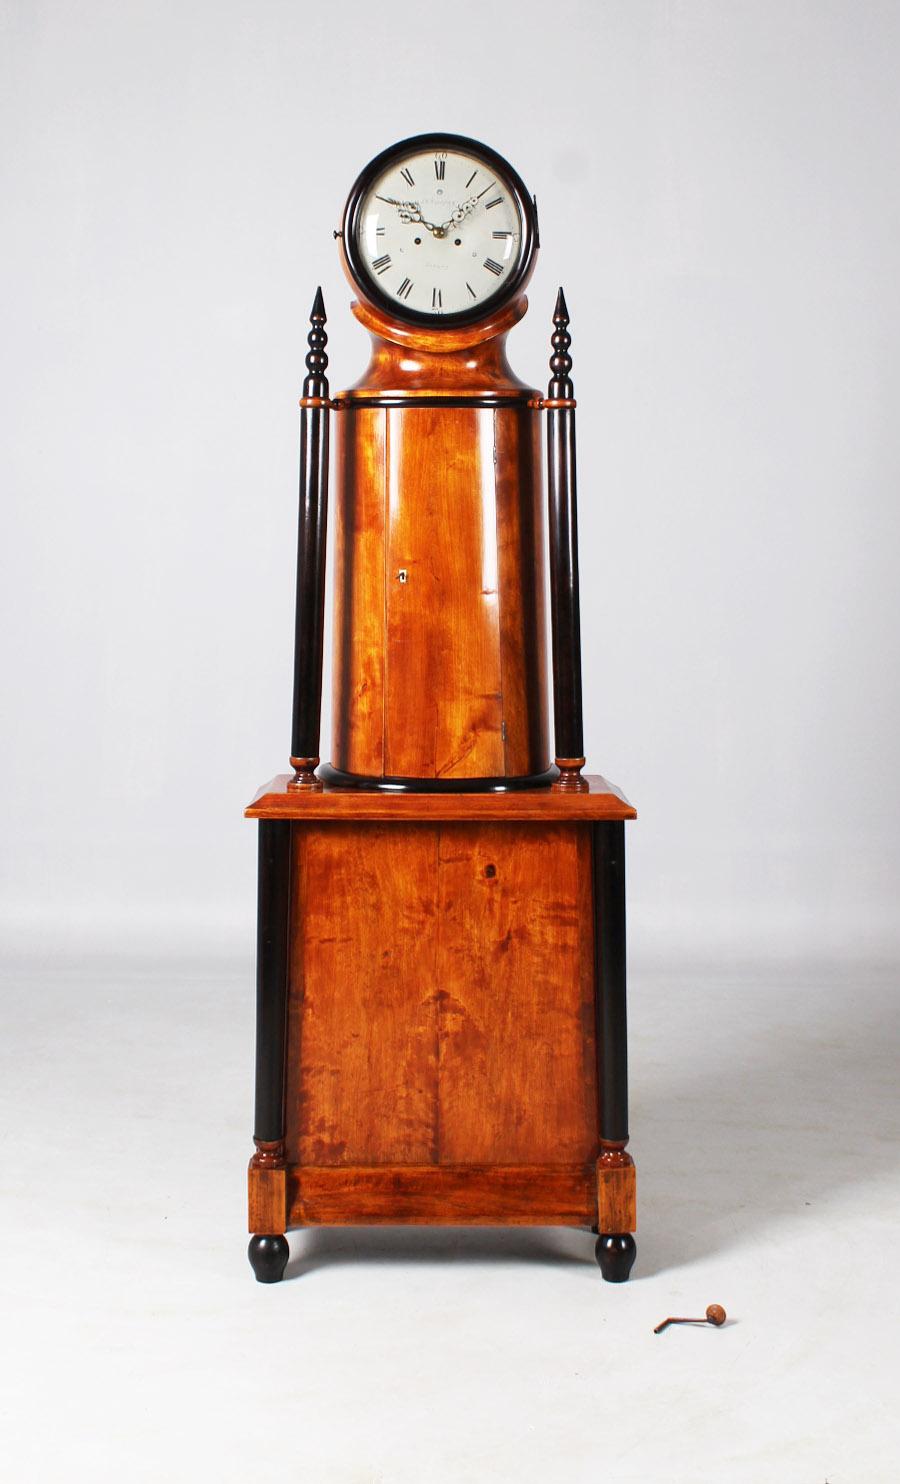 Unusual antique grandfather clock

Sweden
birch
around 1830

Dimensions: Height 205 cm, Wide 69 cm, Deep 30 cm

Description:
Antique Longcase clock made of solid birchwood with solid columns set off in black. Exceptional and rare model.

Base